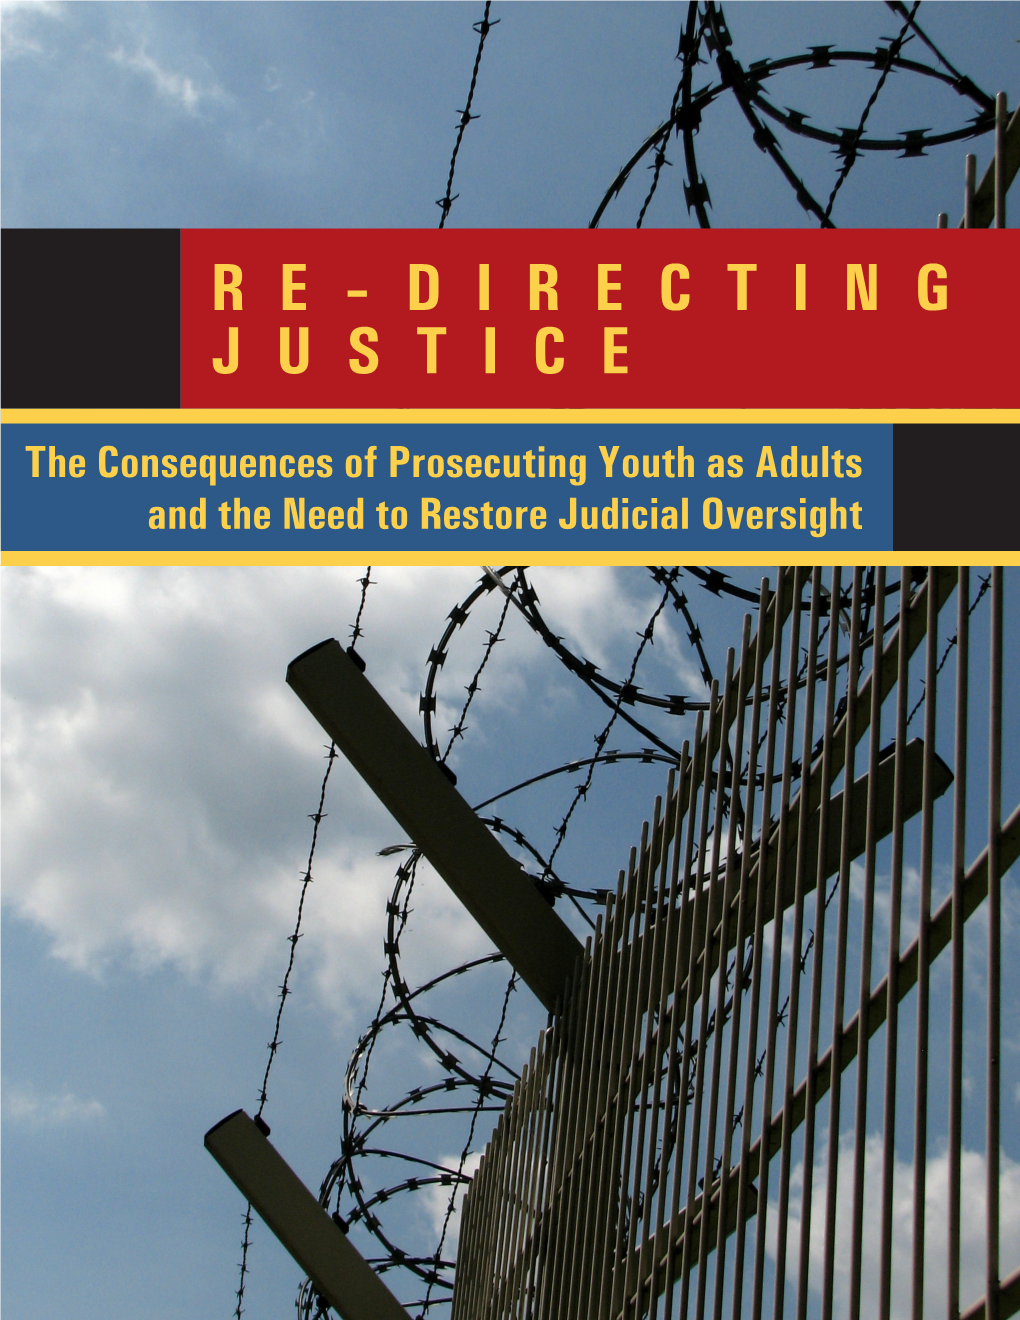 The Consequences of Prosecuting Youth As Adults and the Need to Restore Judicial Oversight